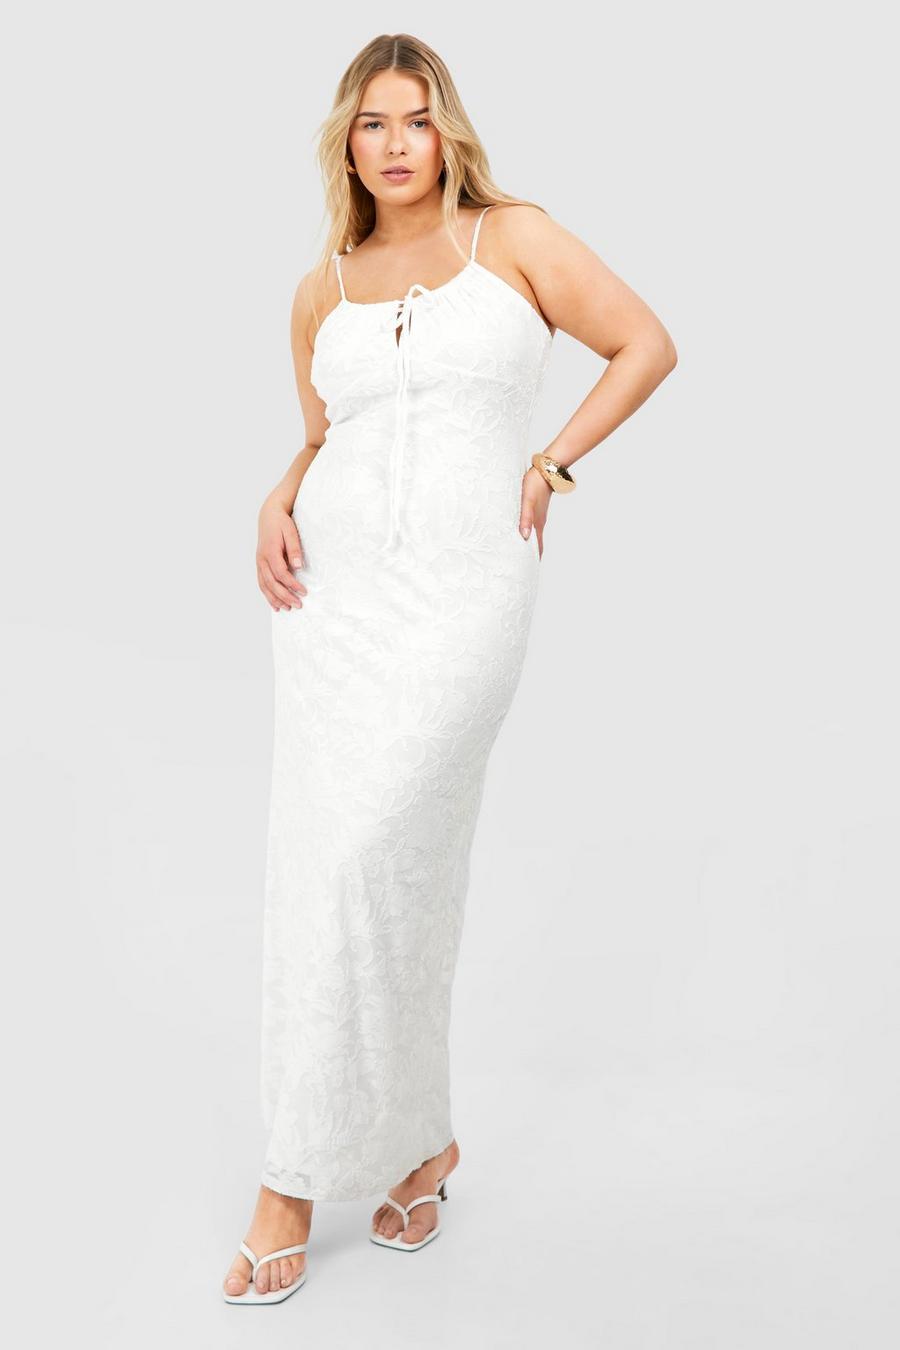 Grande taille - Robe nuisette fleurie, White image number 1